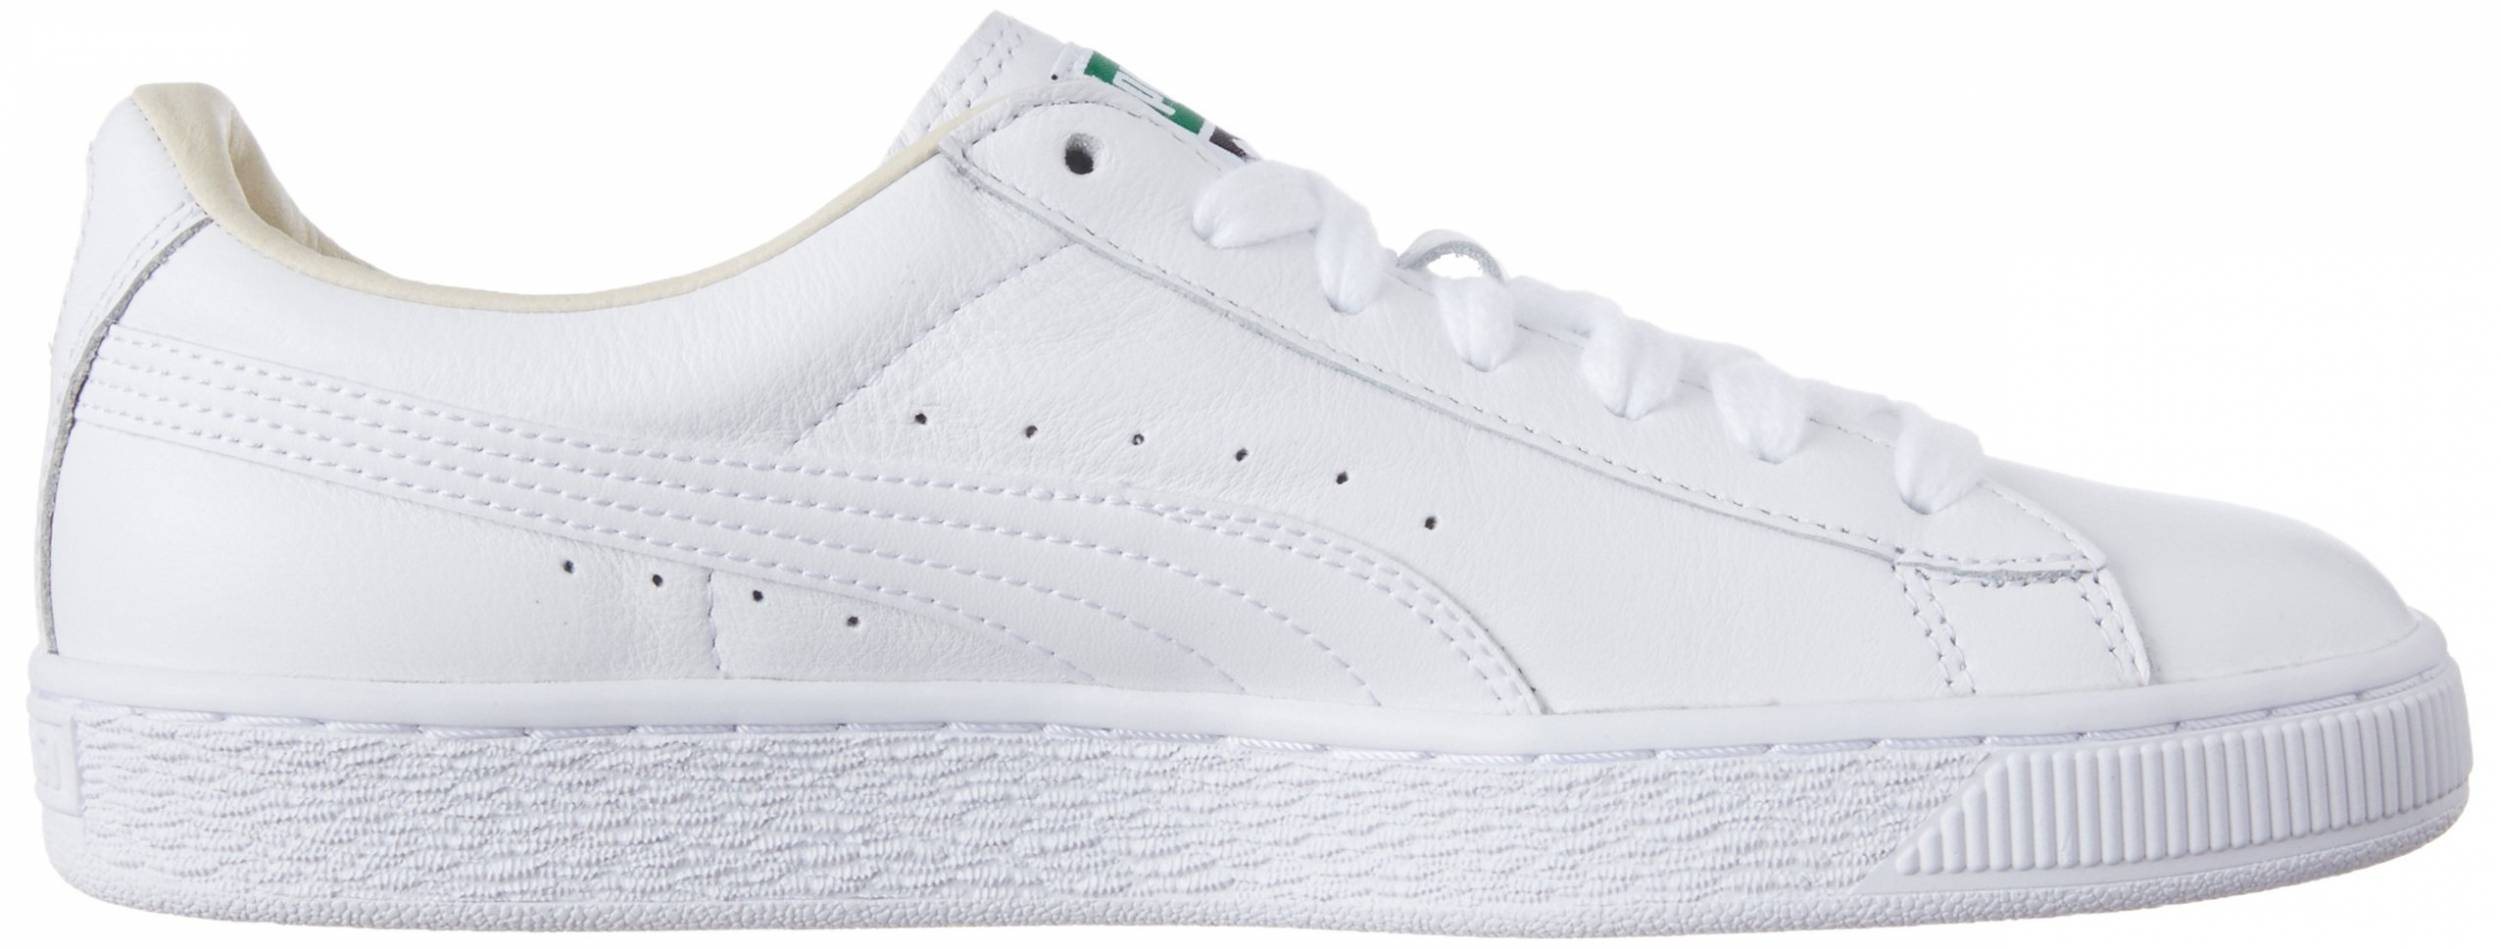 Puma Heritage Basket Classic sneakers in white (only $33) | RunRepeat